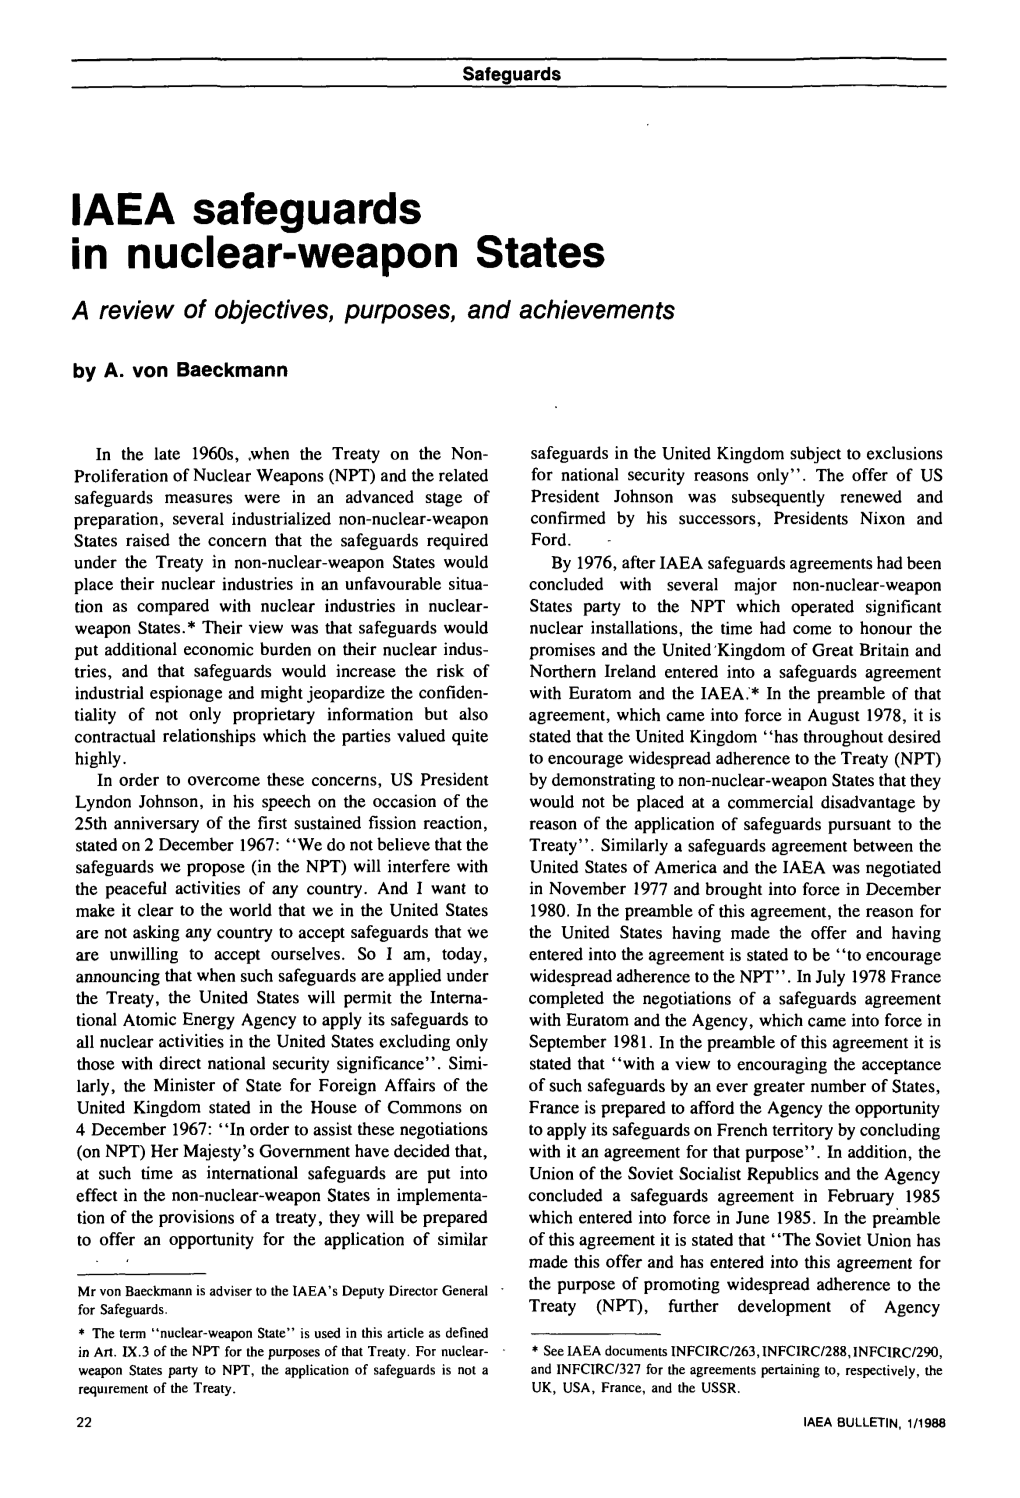 IAEA Safeguards in Nuclear-Weapon States a Review of Objectives, Purposes, and Achievements by A